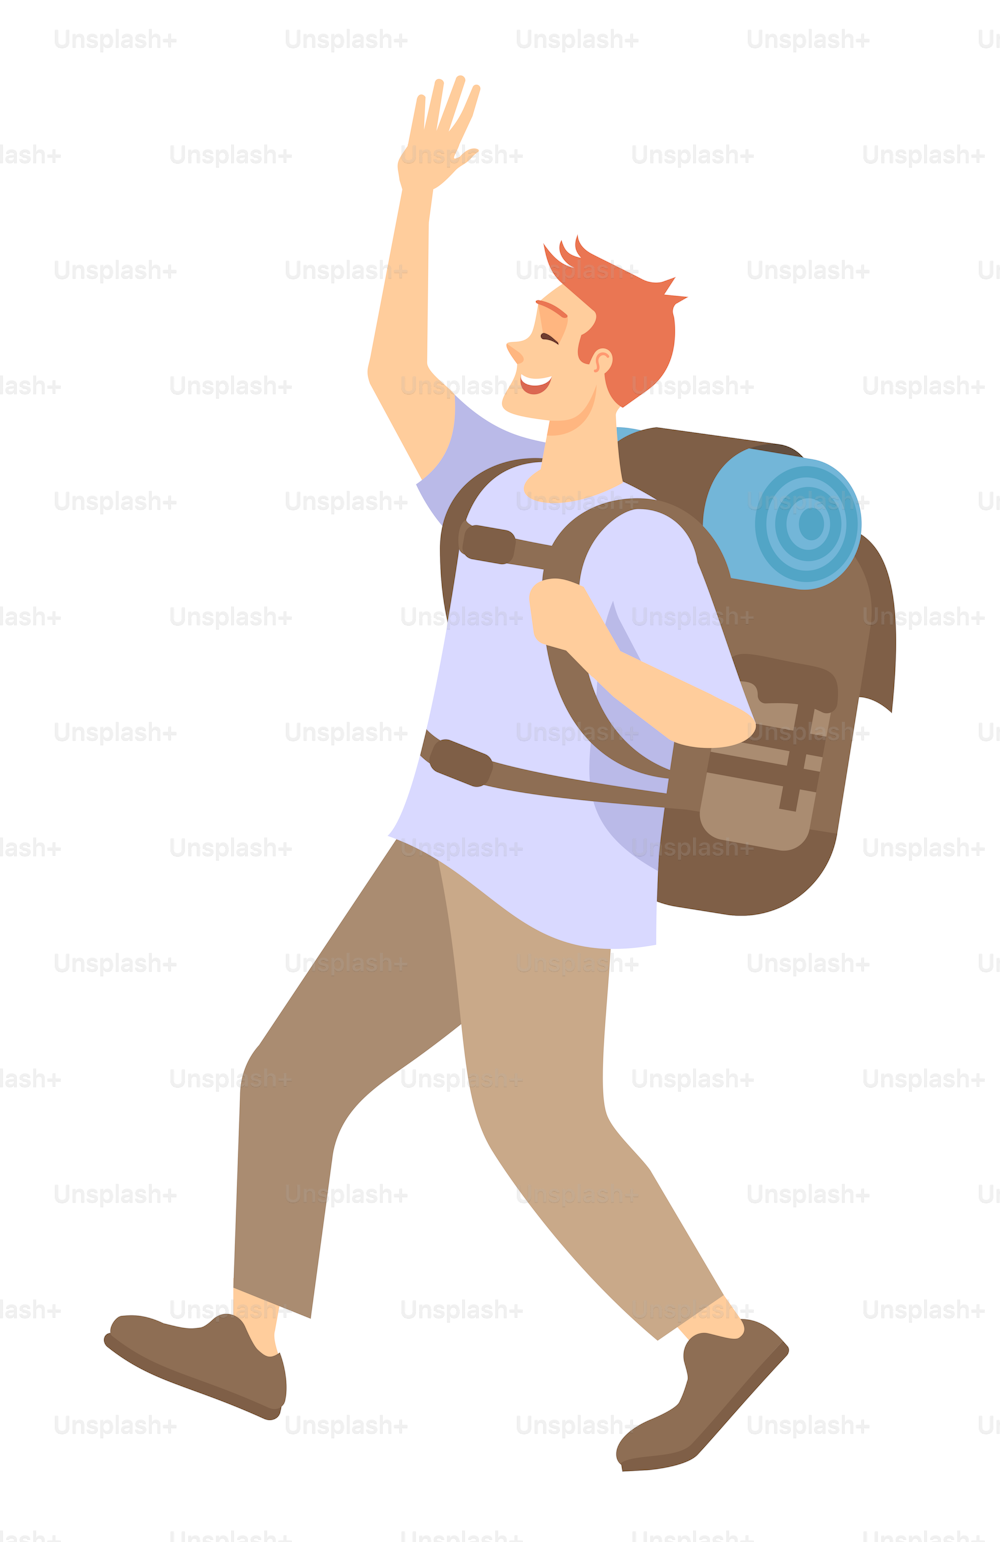 Trekking adventure semi flat RGB color vector illustration. Young man with travel backpack going to trip isolated cartoon character on white background